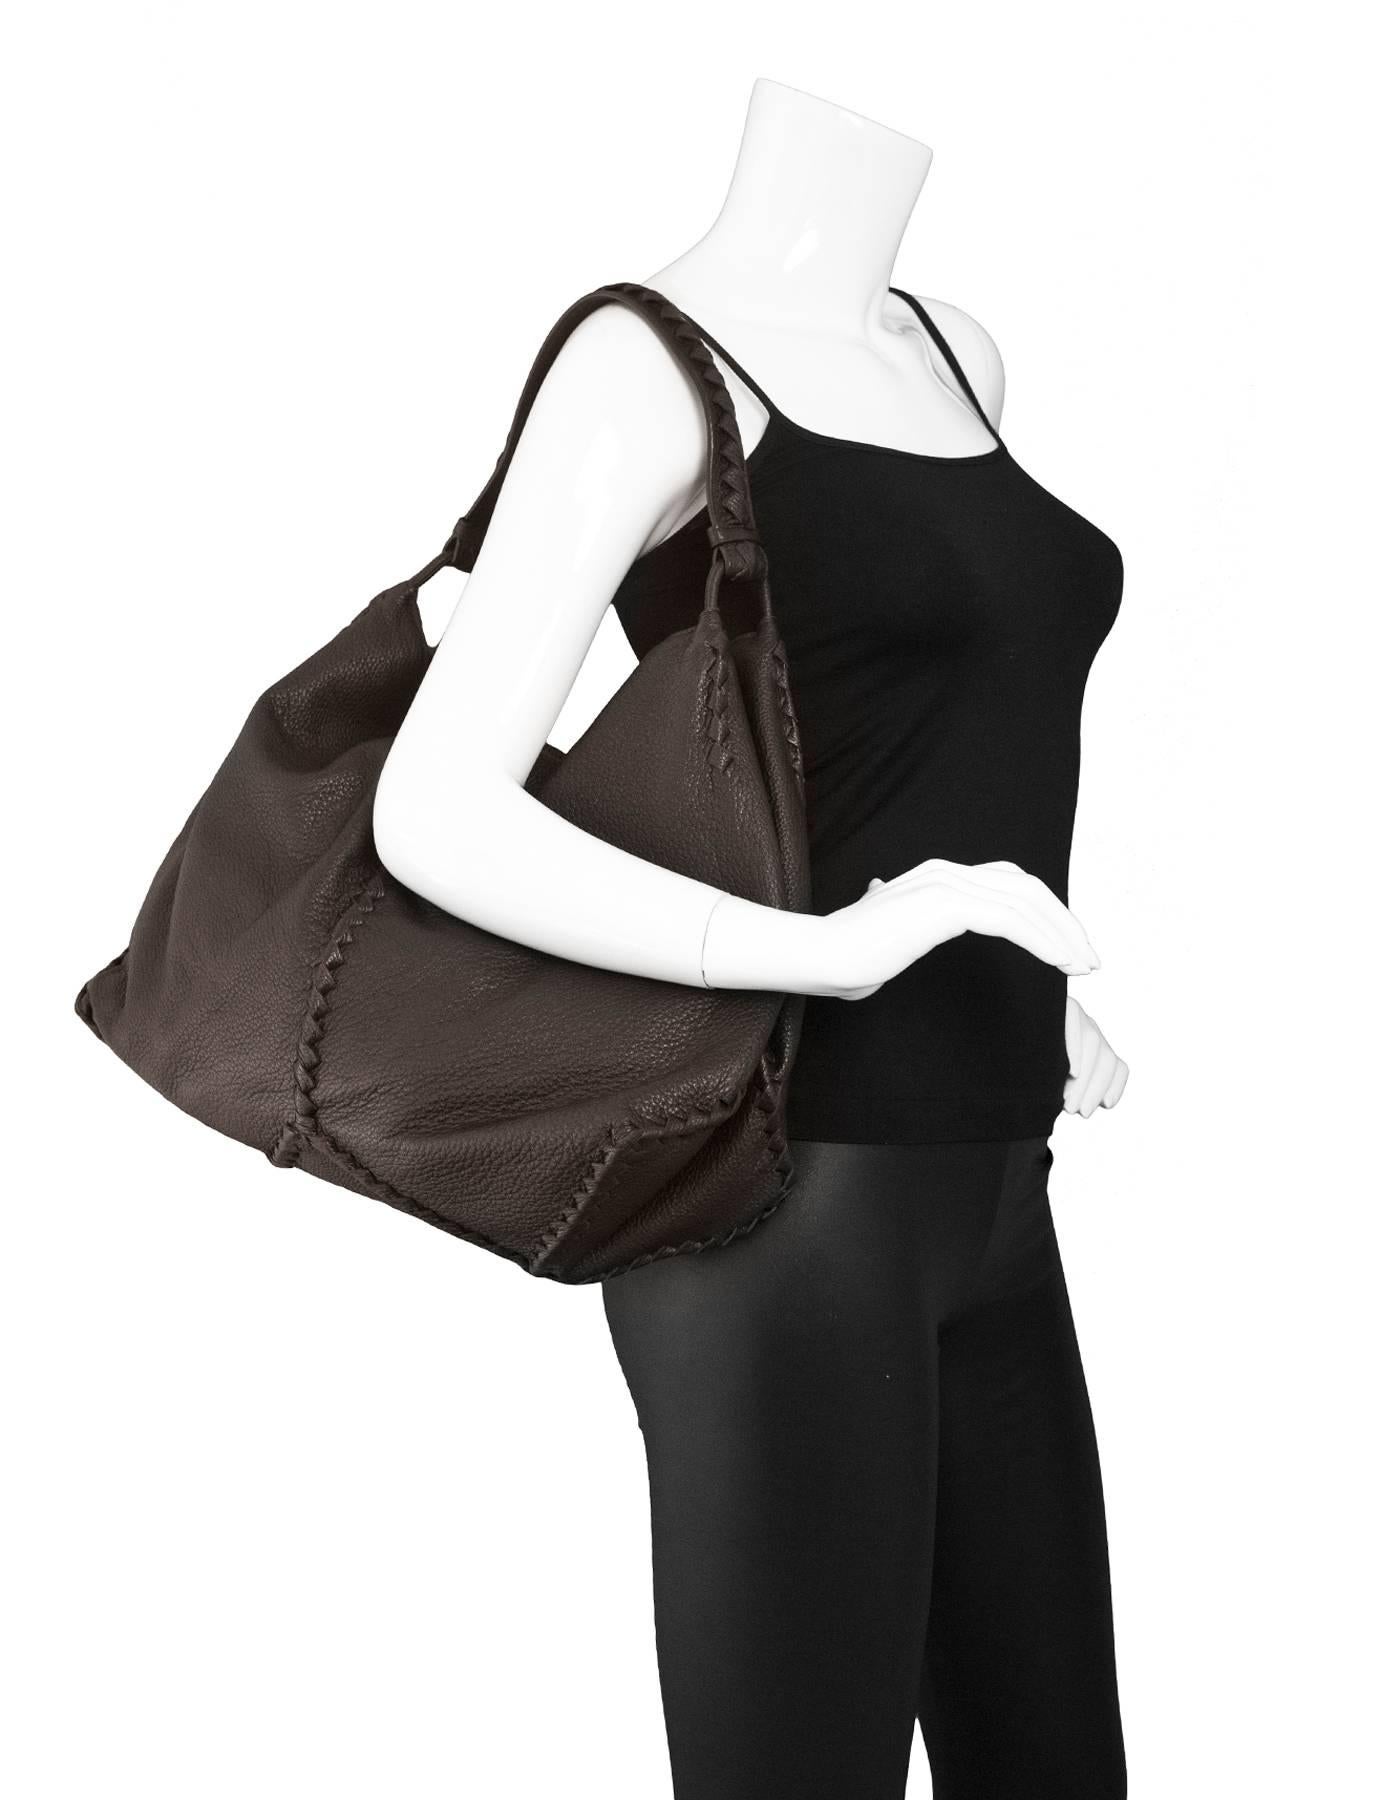 Bottega Veneta Brown Leather Deerskin Hobo Bag

Made In: Italy
Color: Brown
Hardware: None
Materials: Deerskin leather
Lining: Taupe suede
Closure/Opening: Open top
Exterior Pockets: None
Interior Pockets: One zip pocket and one small wall